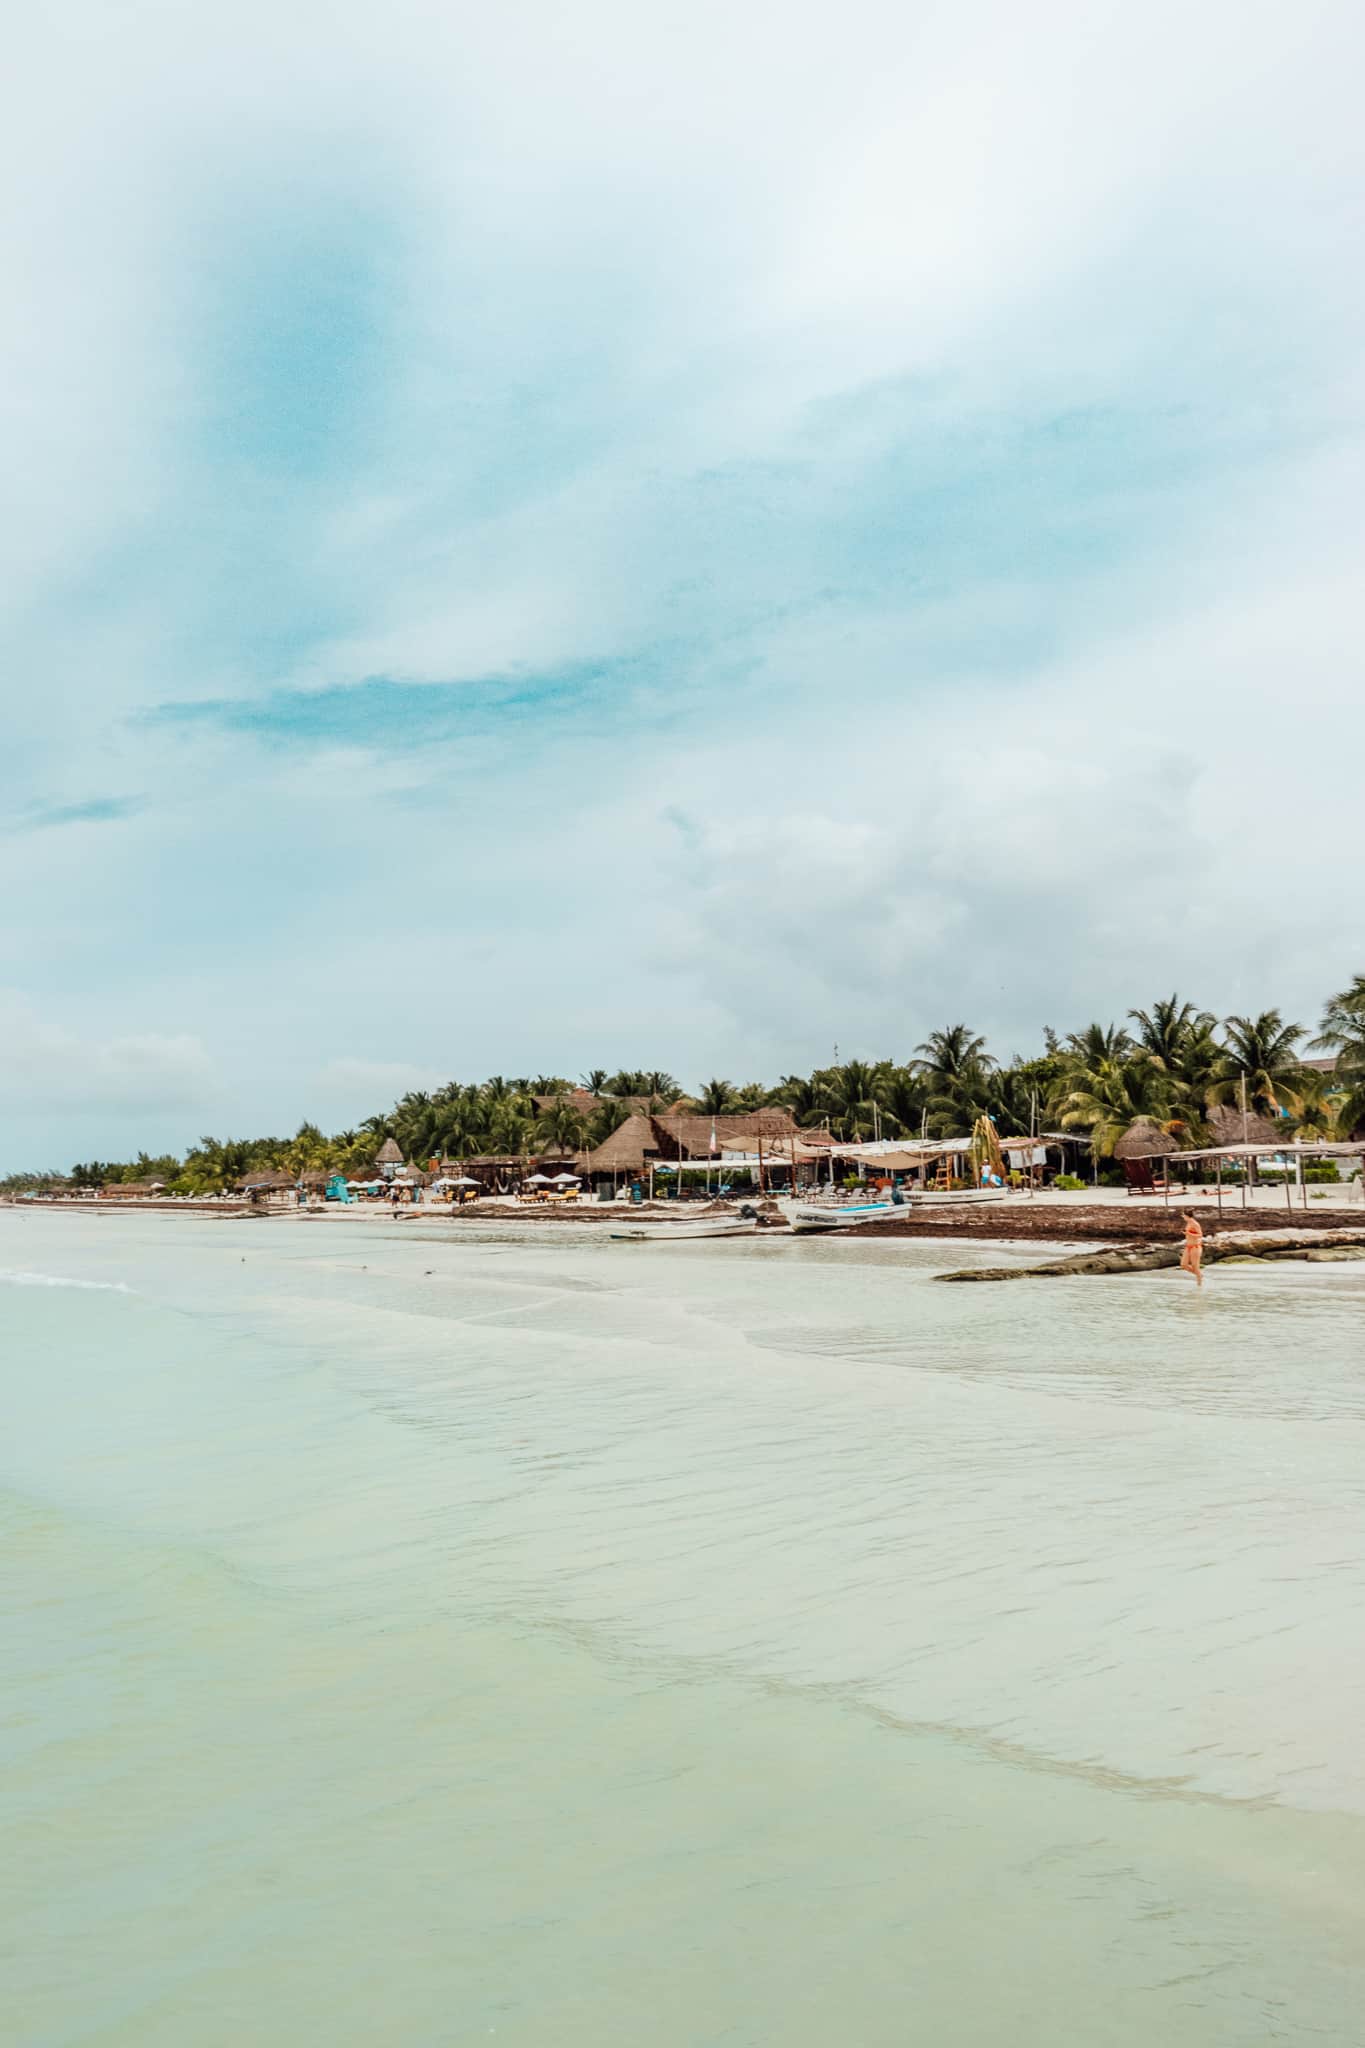 View of the beach in Isla Holbox